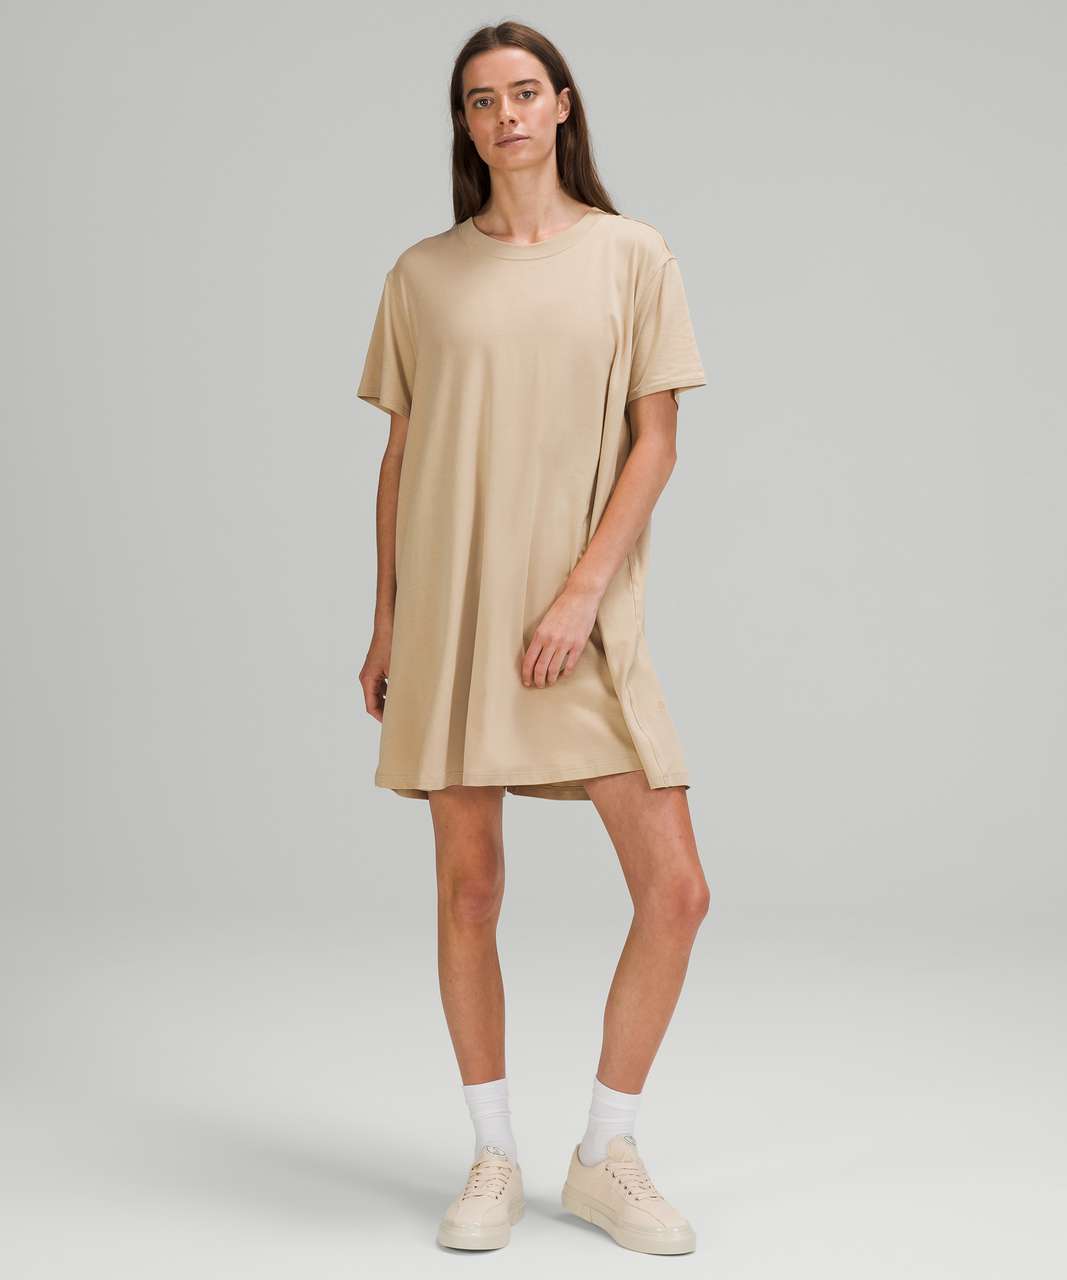 Lululemon All Yours Tee Dress - Trench